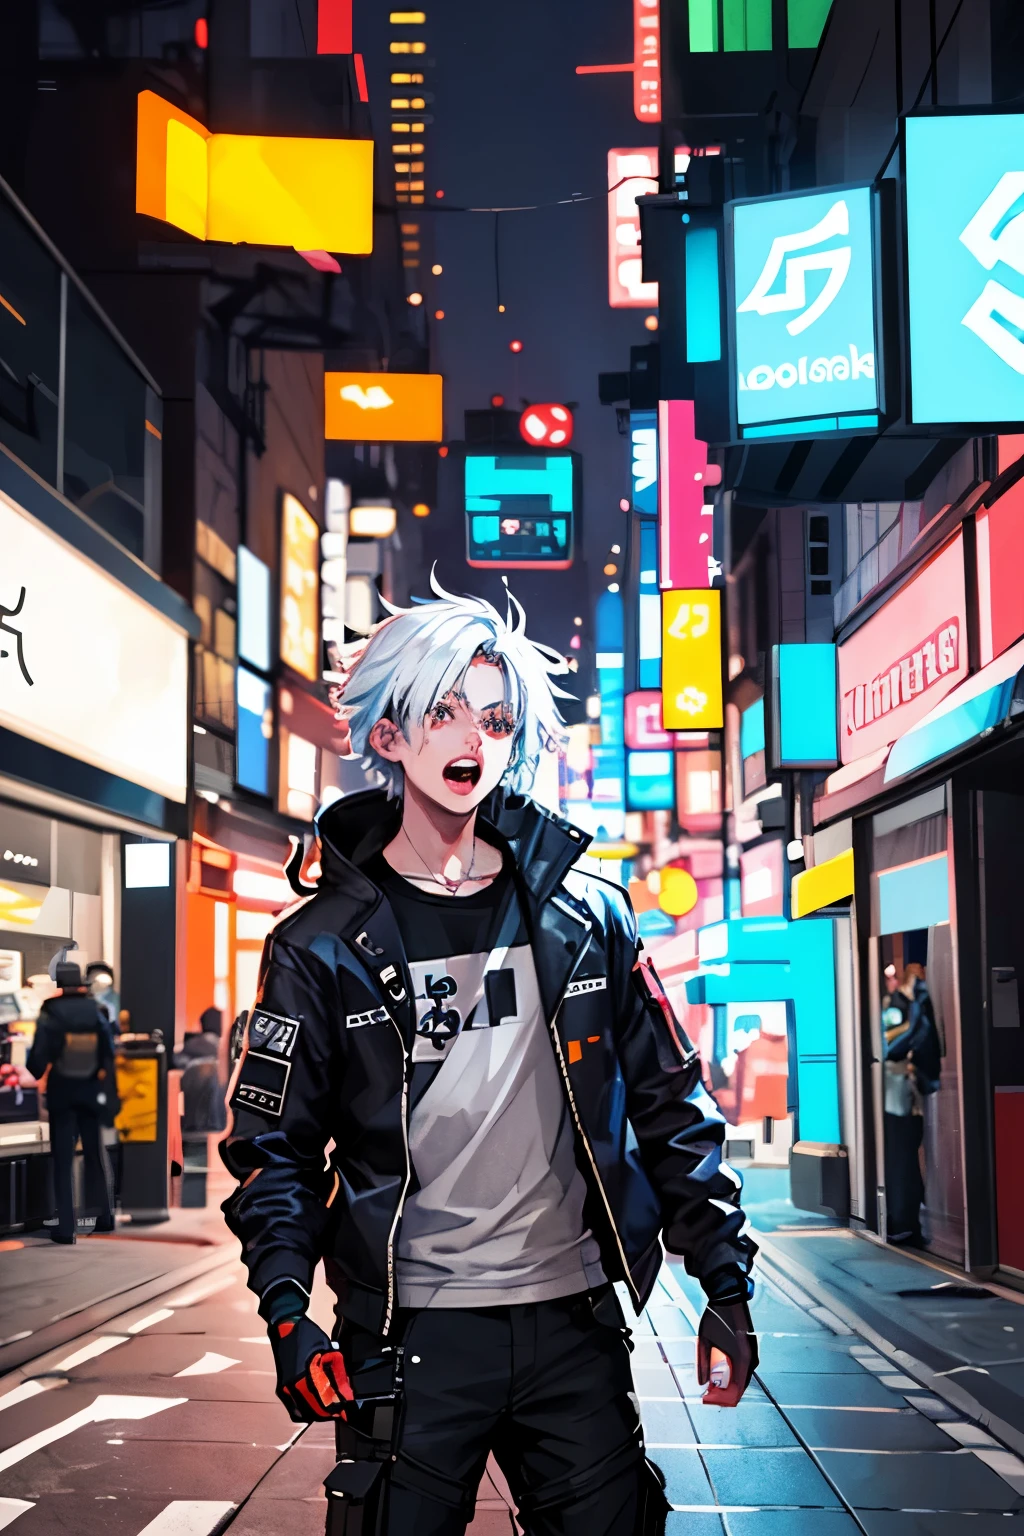 high quality, chromatic lighting
colorized, white limited color palette, 
detailed concept drawing,
Shibuya street guy, cyberpunk, futuristic,
portrait, 20yo 1guy, jacket, combat-pants, short white hair, yelling